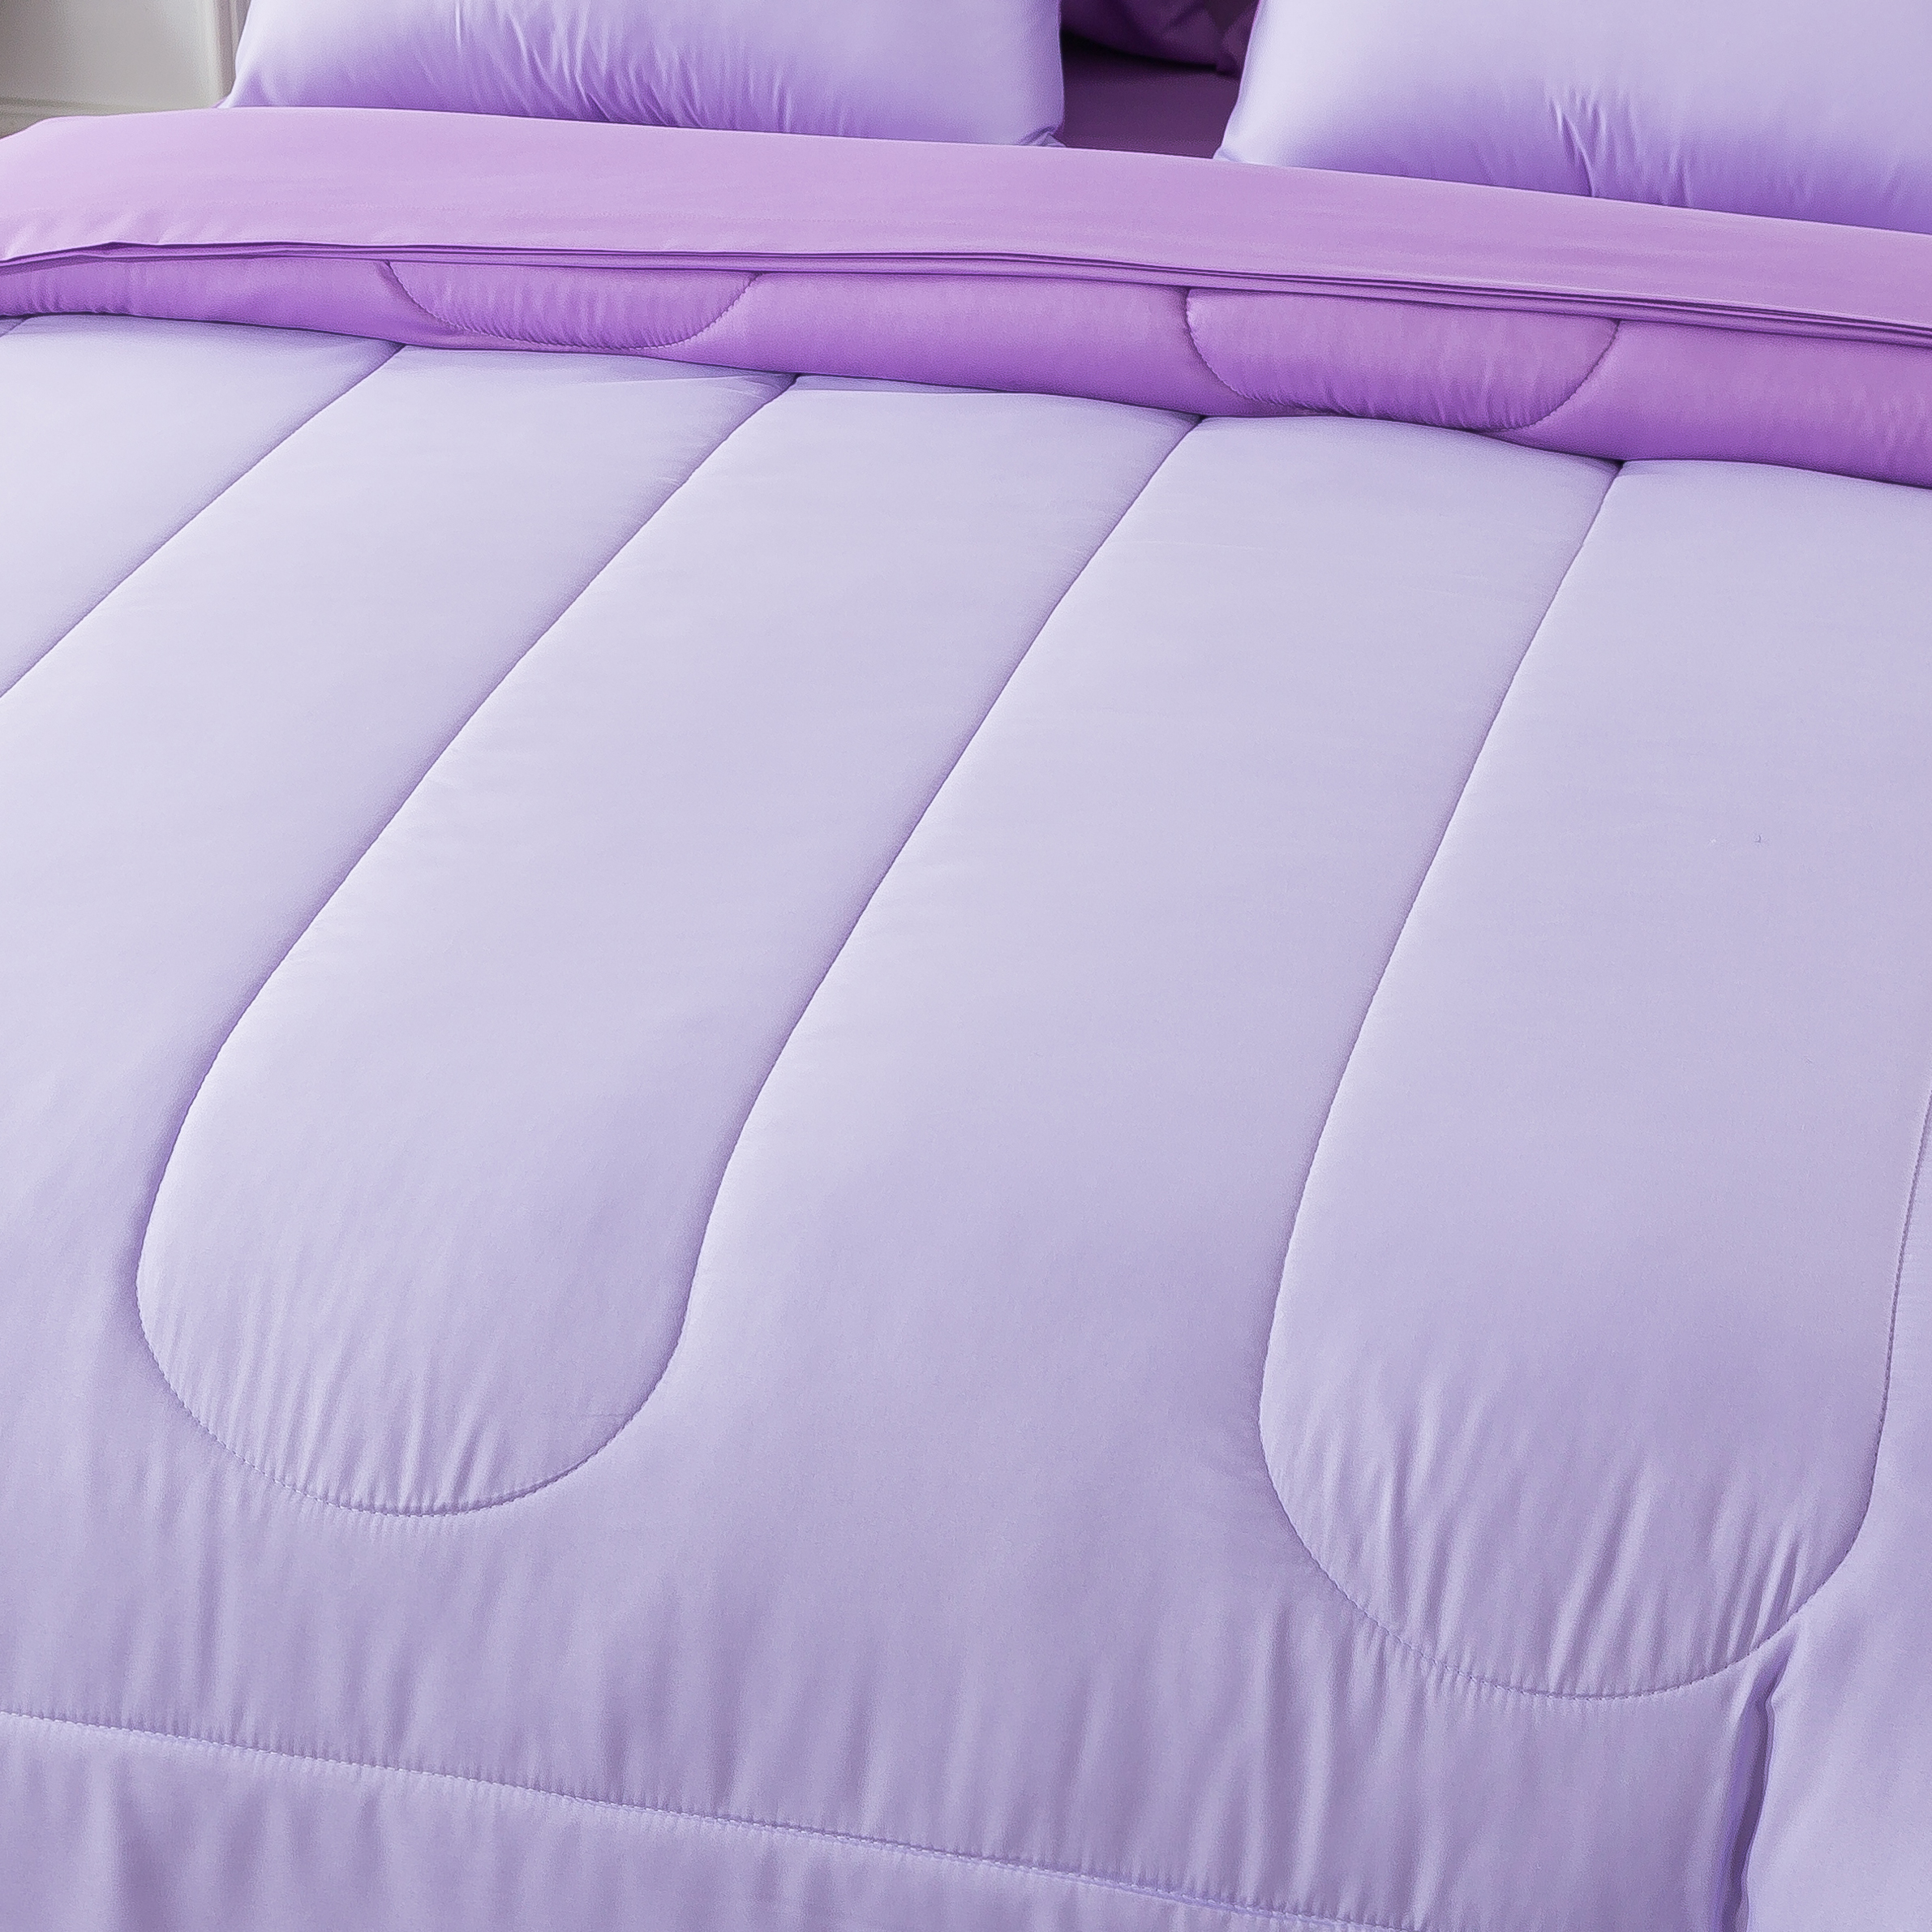 Mainstays Purple Reversible 7-Piece Bed in a Bag Comforter Set with Sheets, Queen - image 2 of 10